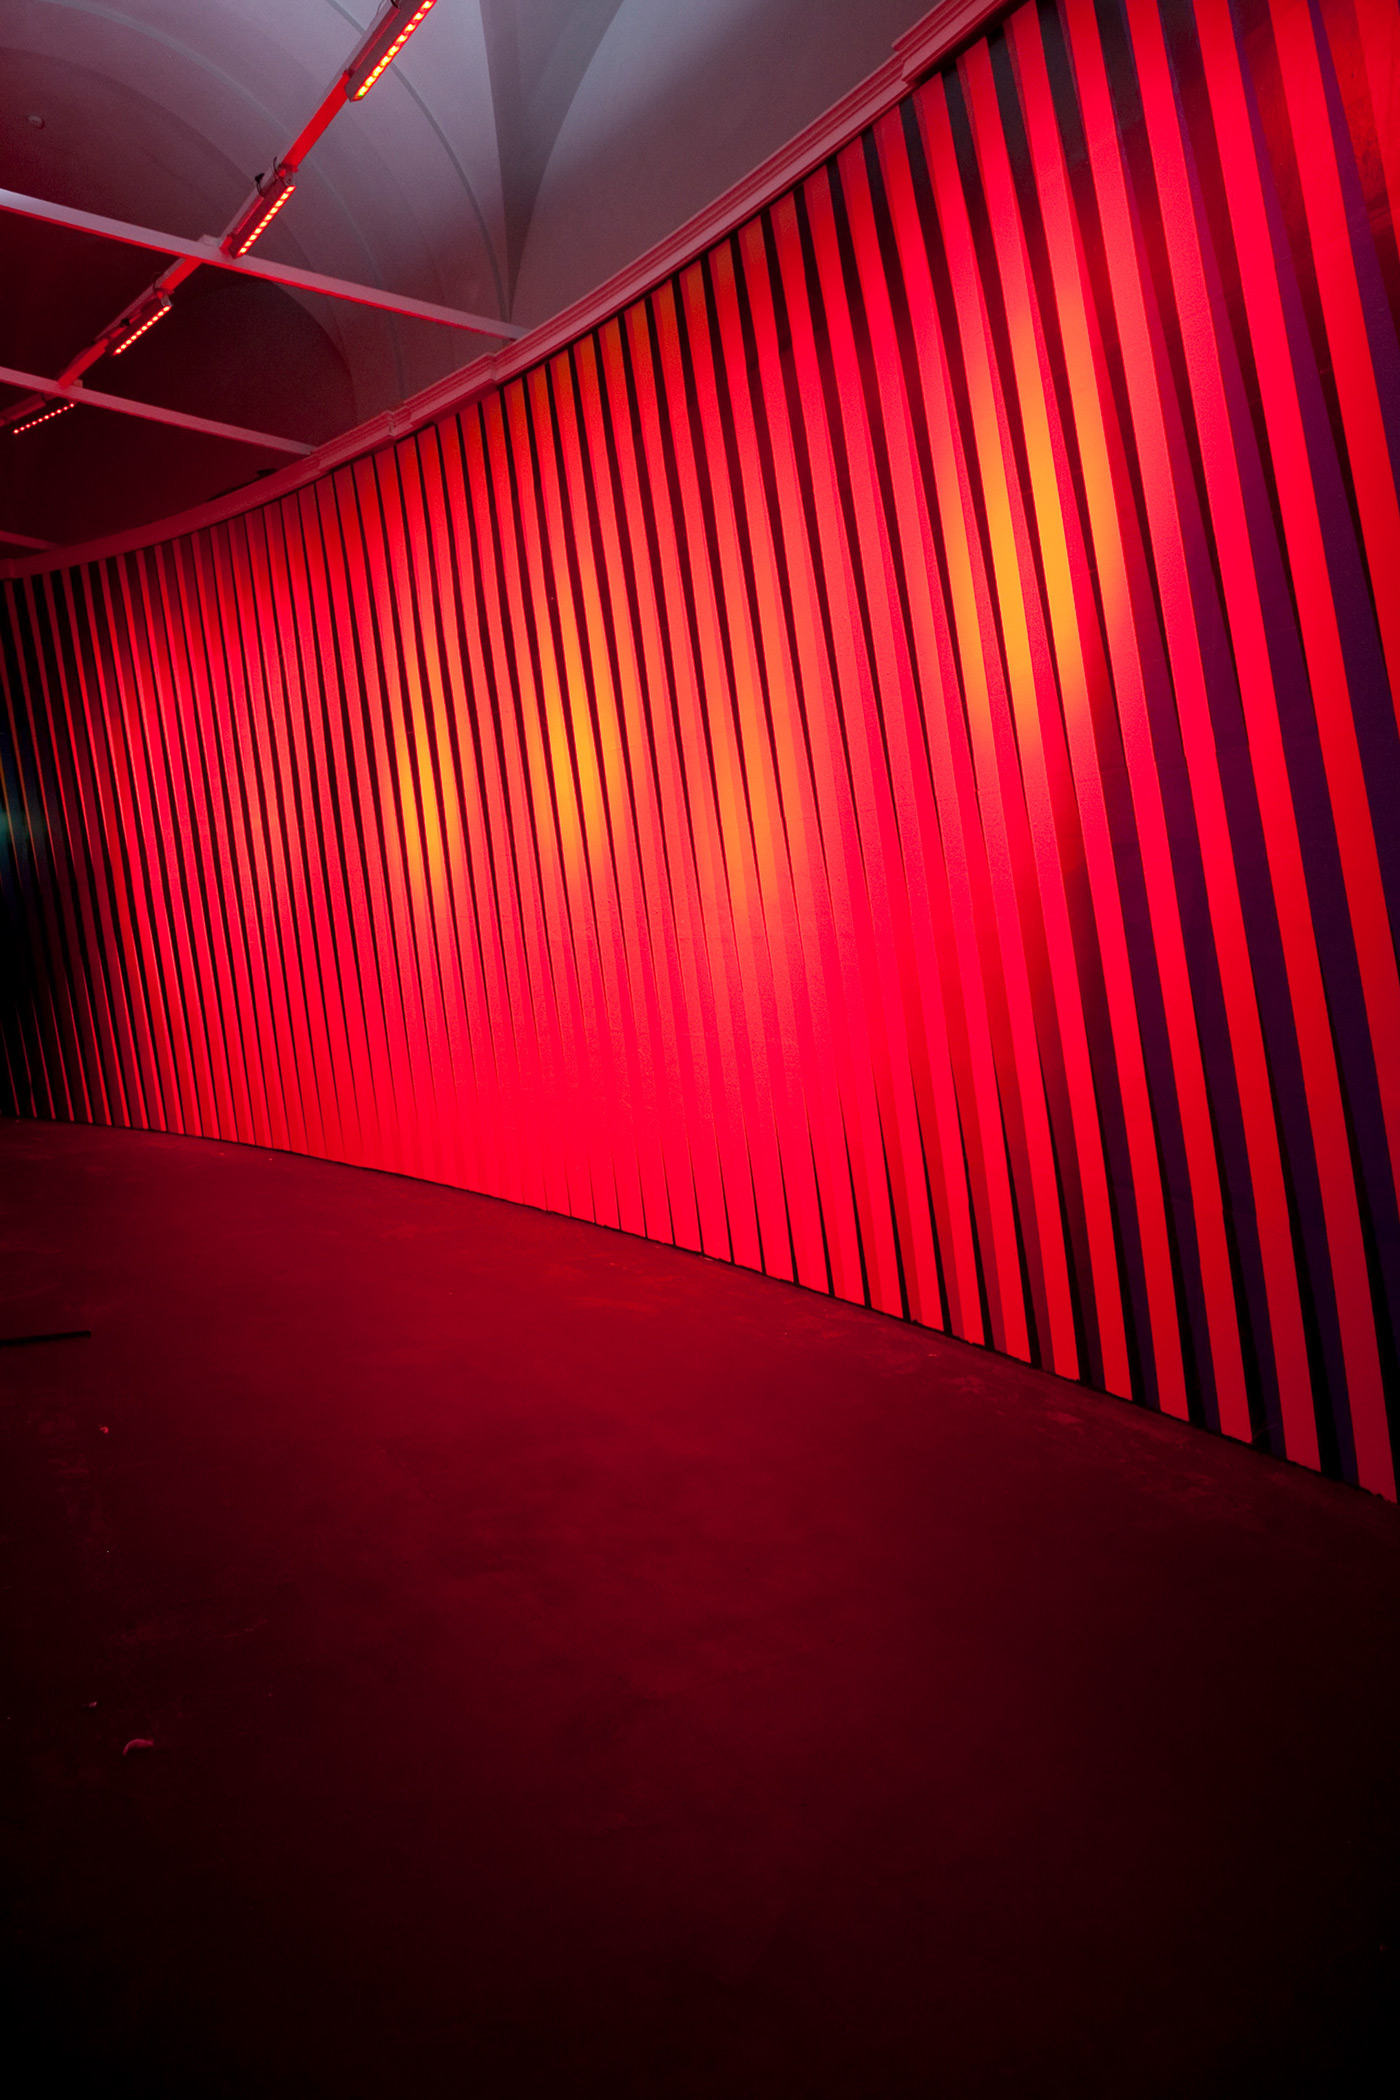 color changing wallpaper,red,light,lighting,magenta,architecture